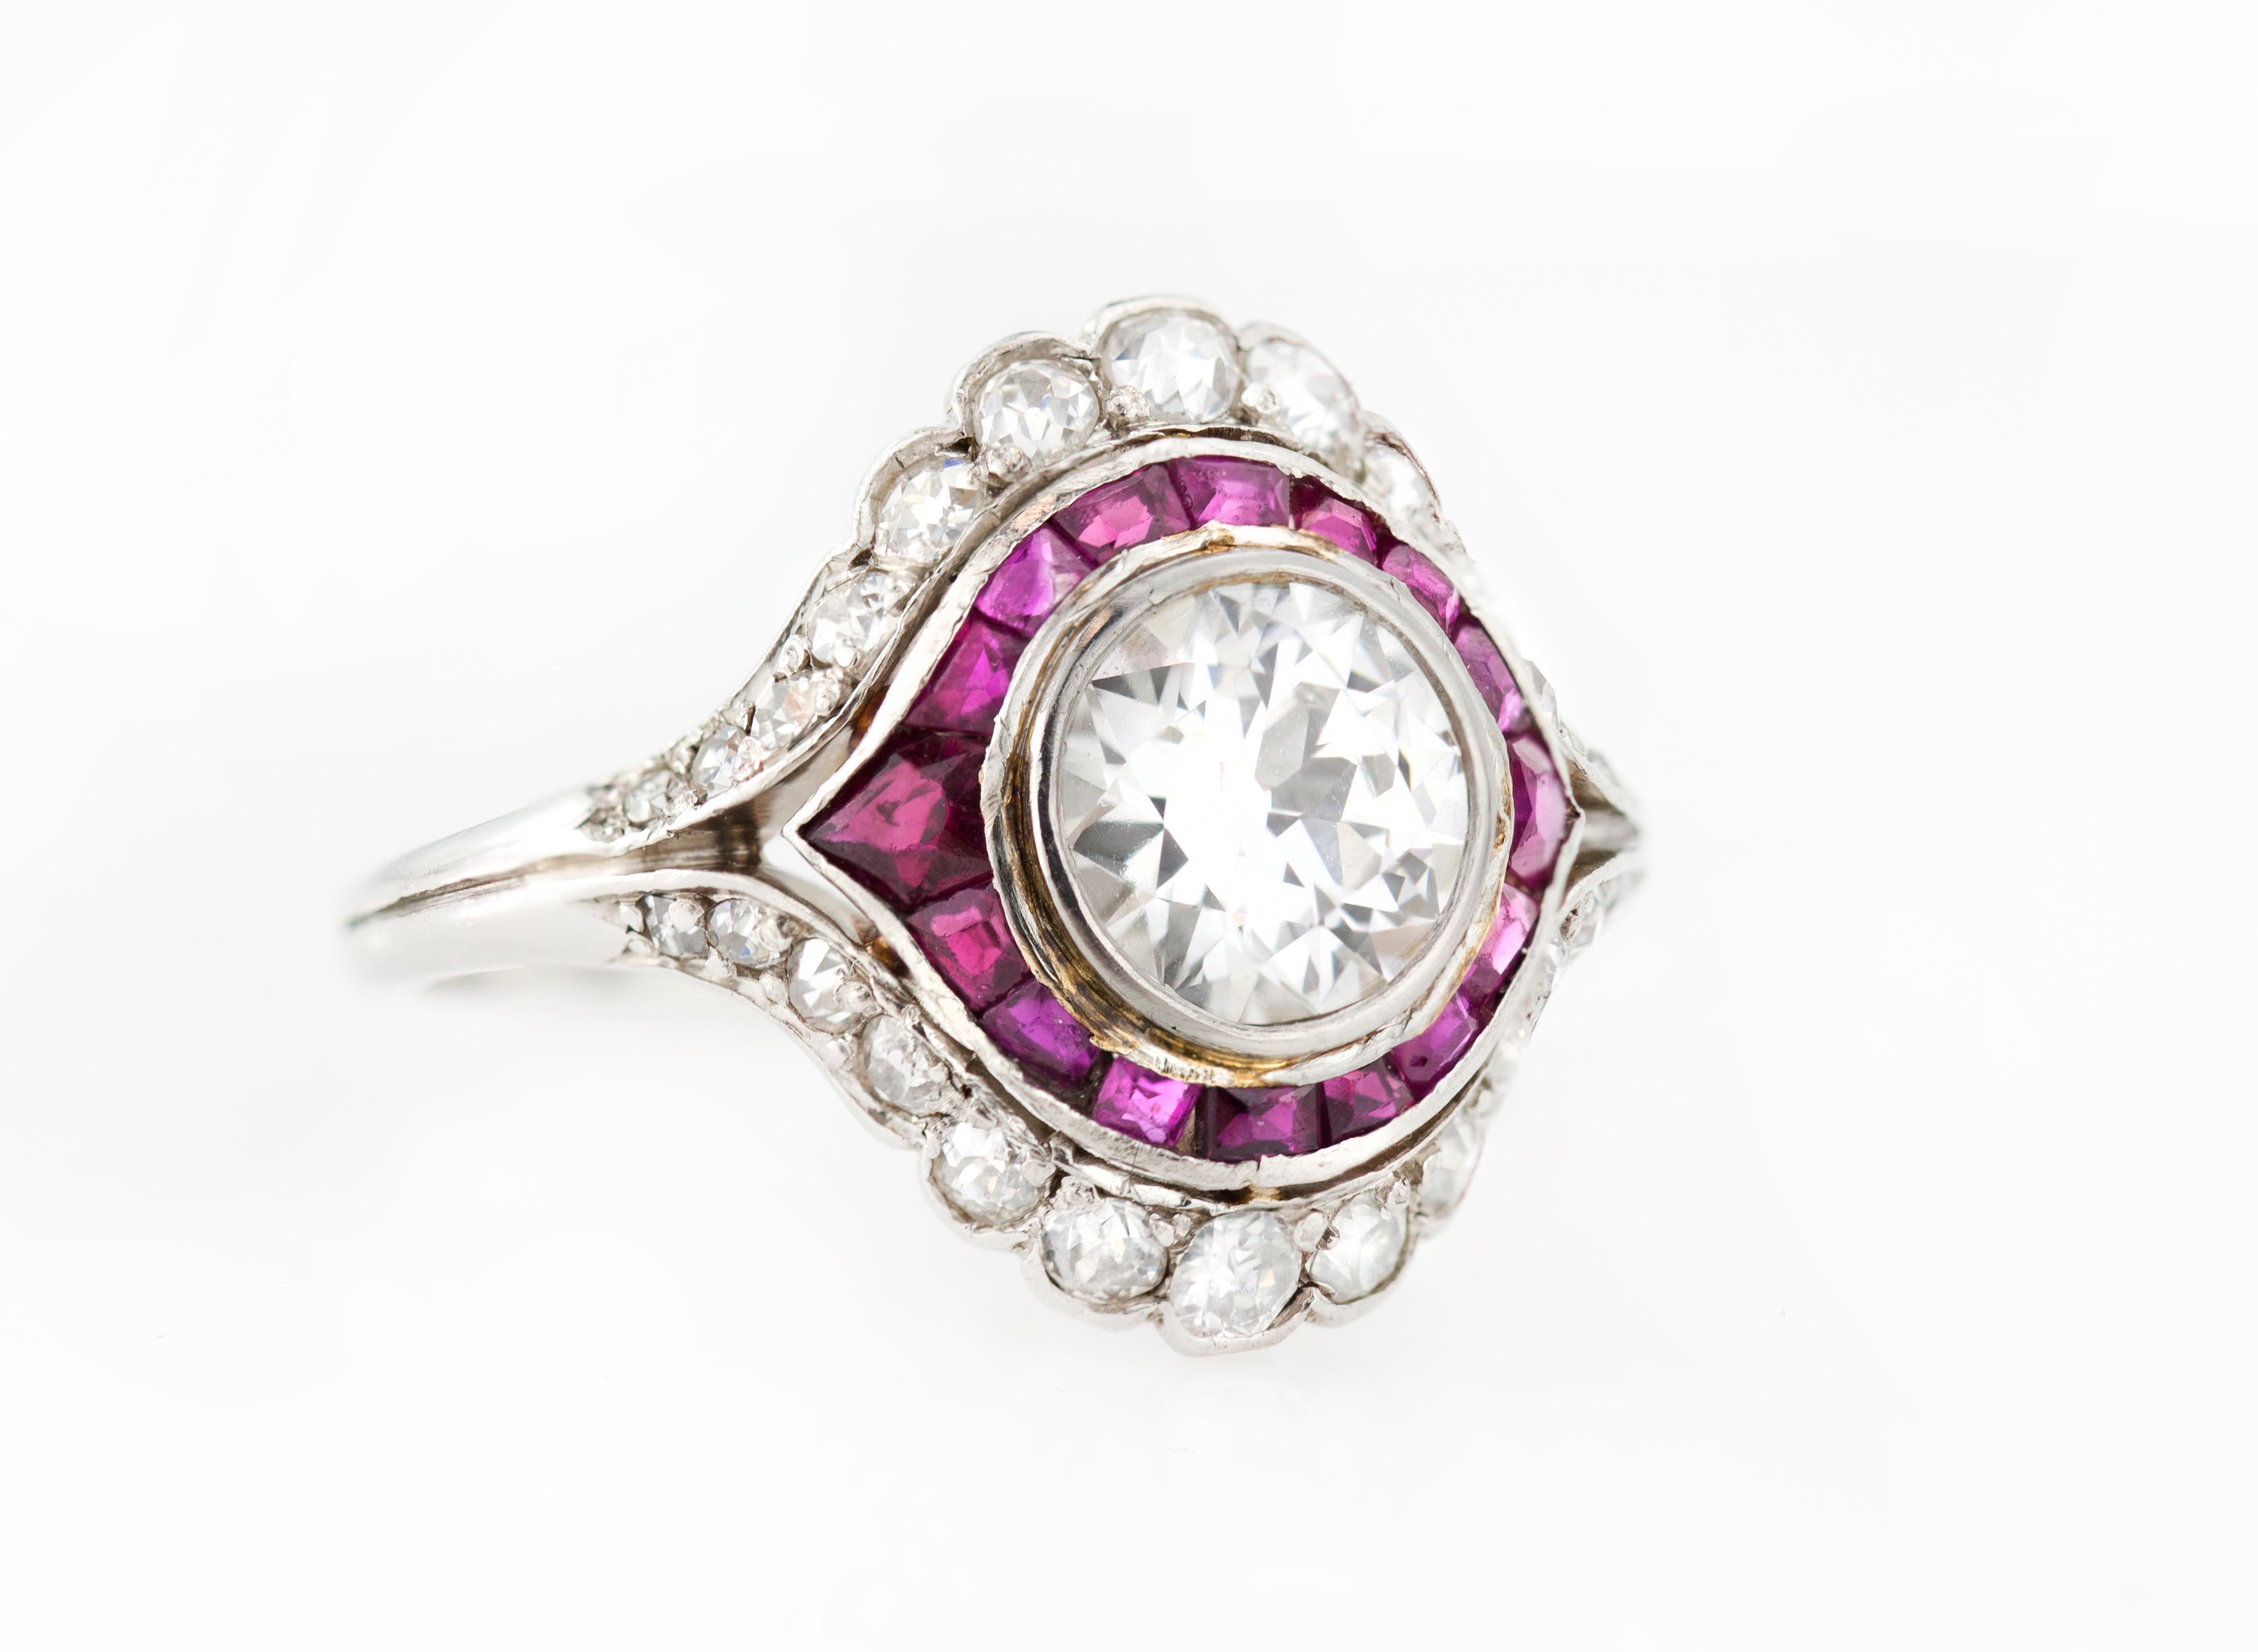 Art Deco Platinum Ladies Ring with 1.50 Carat Diamond and Rubies, 1930s In Good Condition For Sale In Braintree, GB